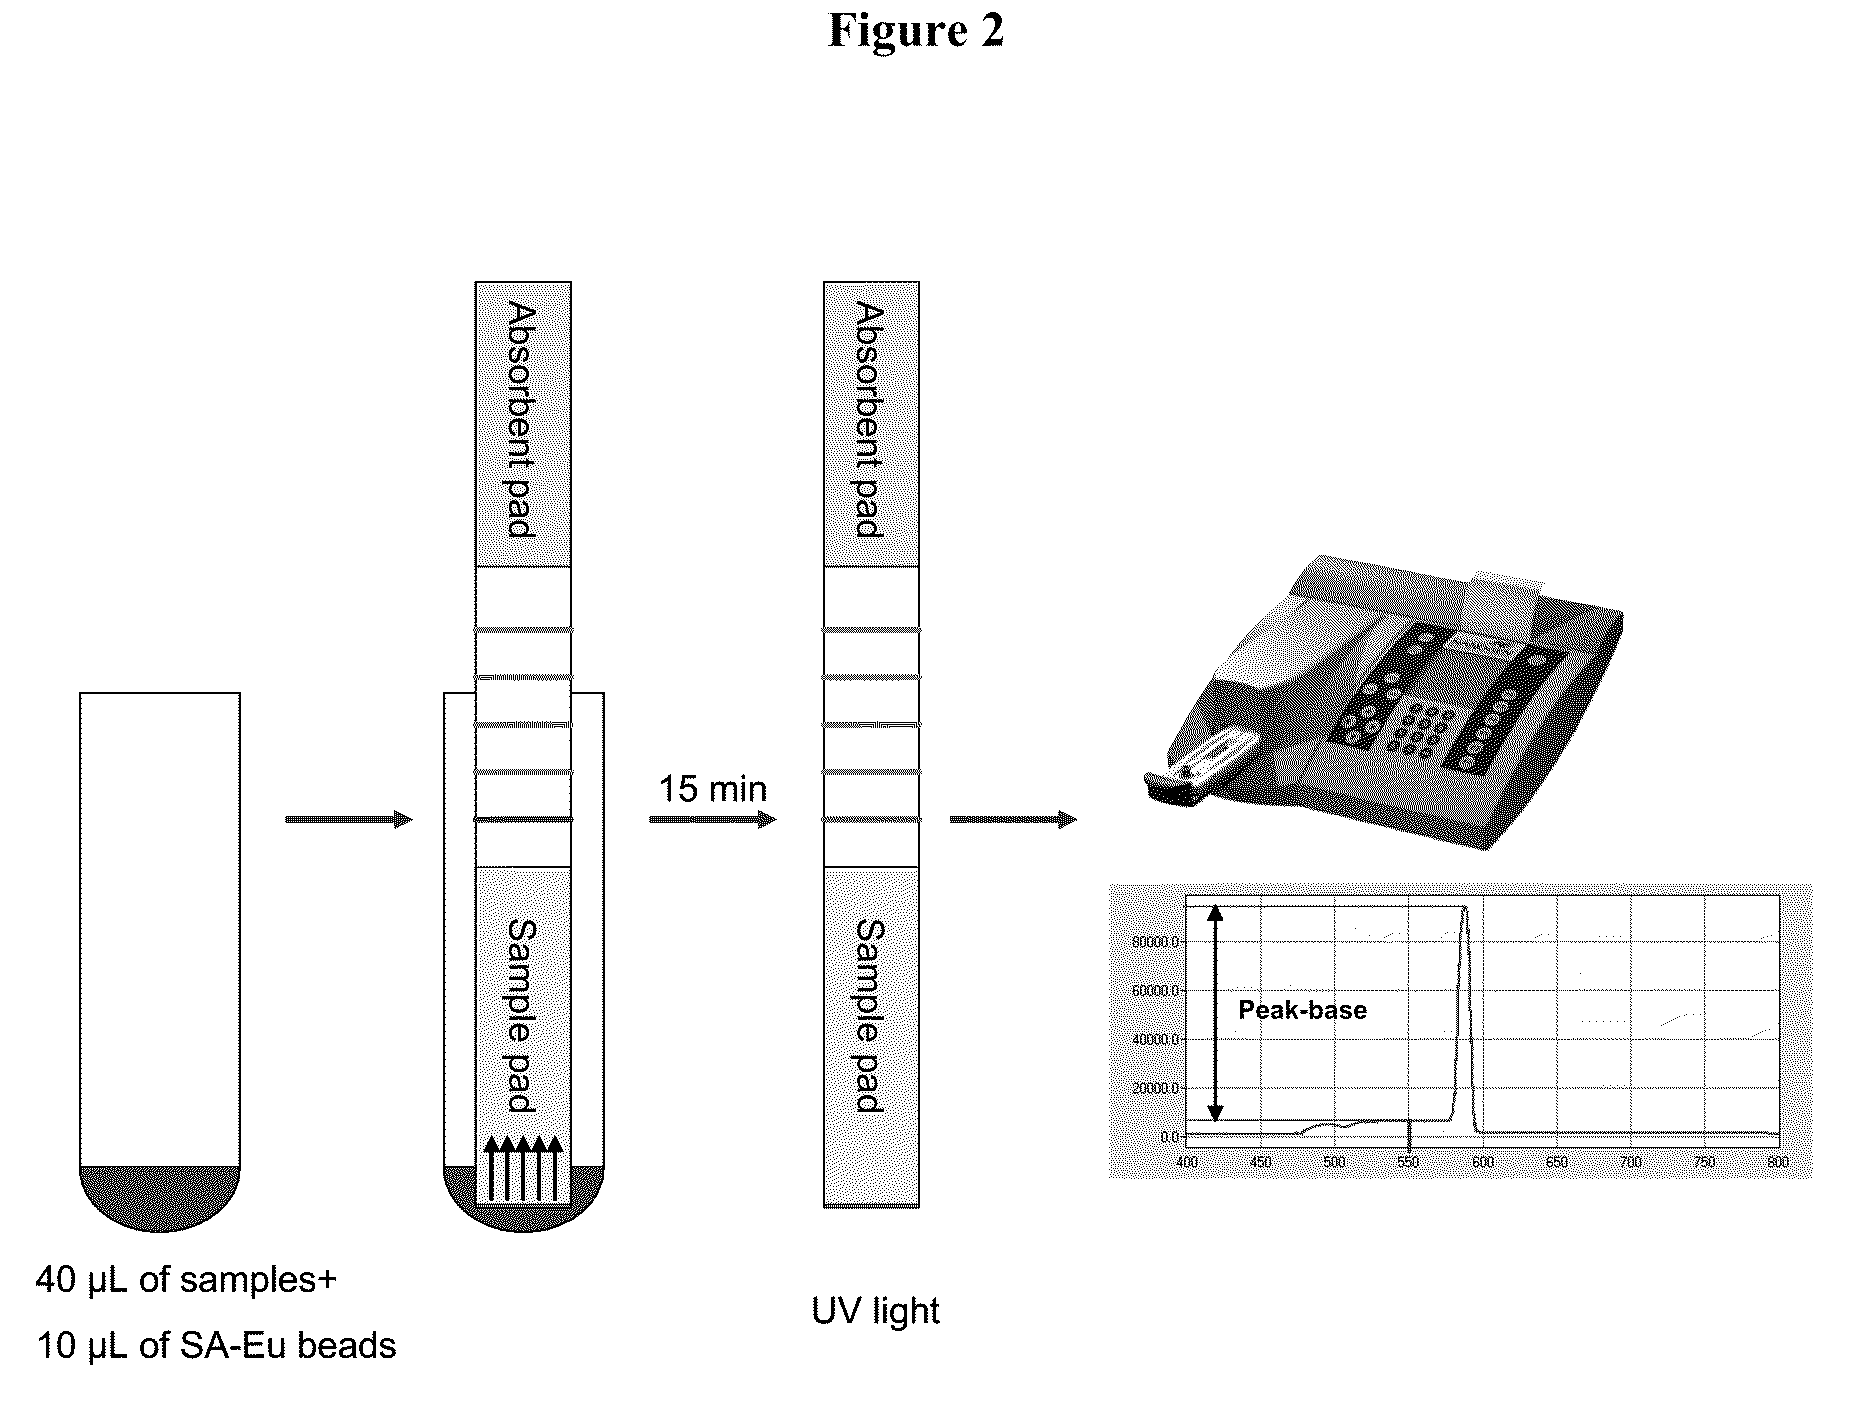 Methods for detecting nucleic acids in a sample